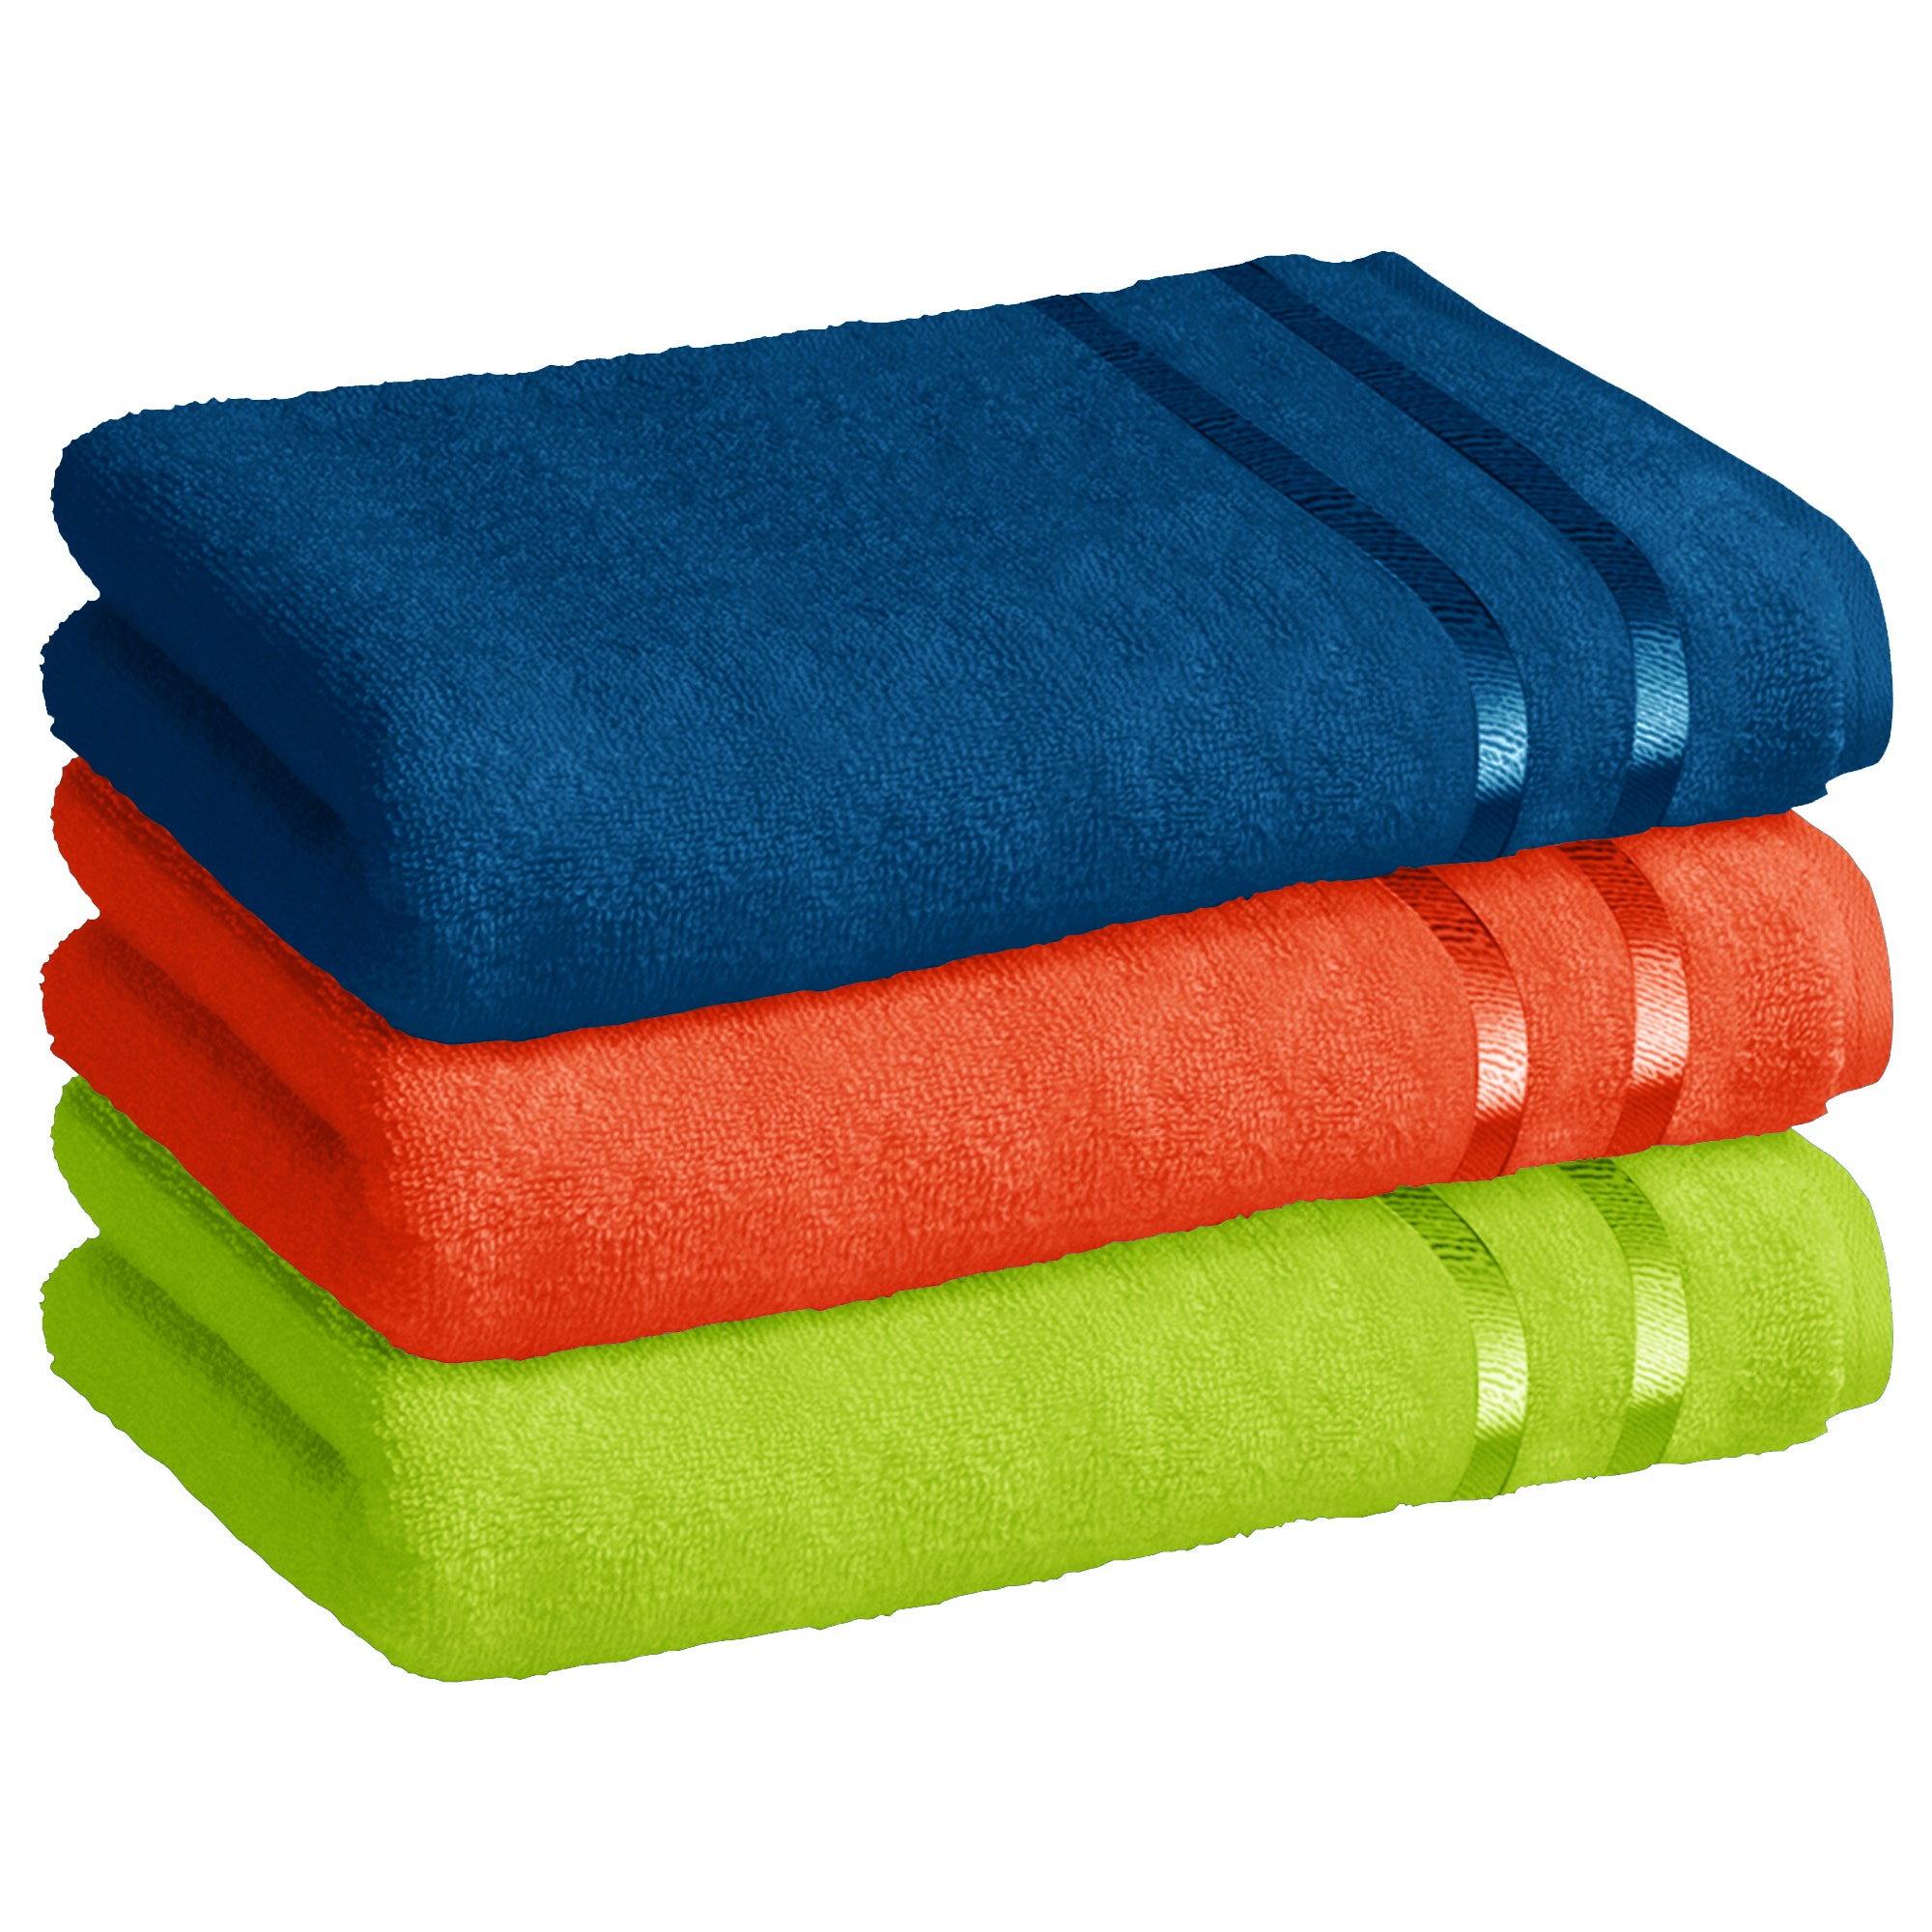 Story@Home 3 Units 100% Cotton Ladies Bath Towels - Navy, Orange and Green